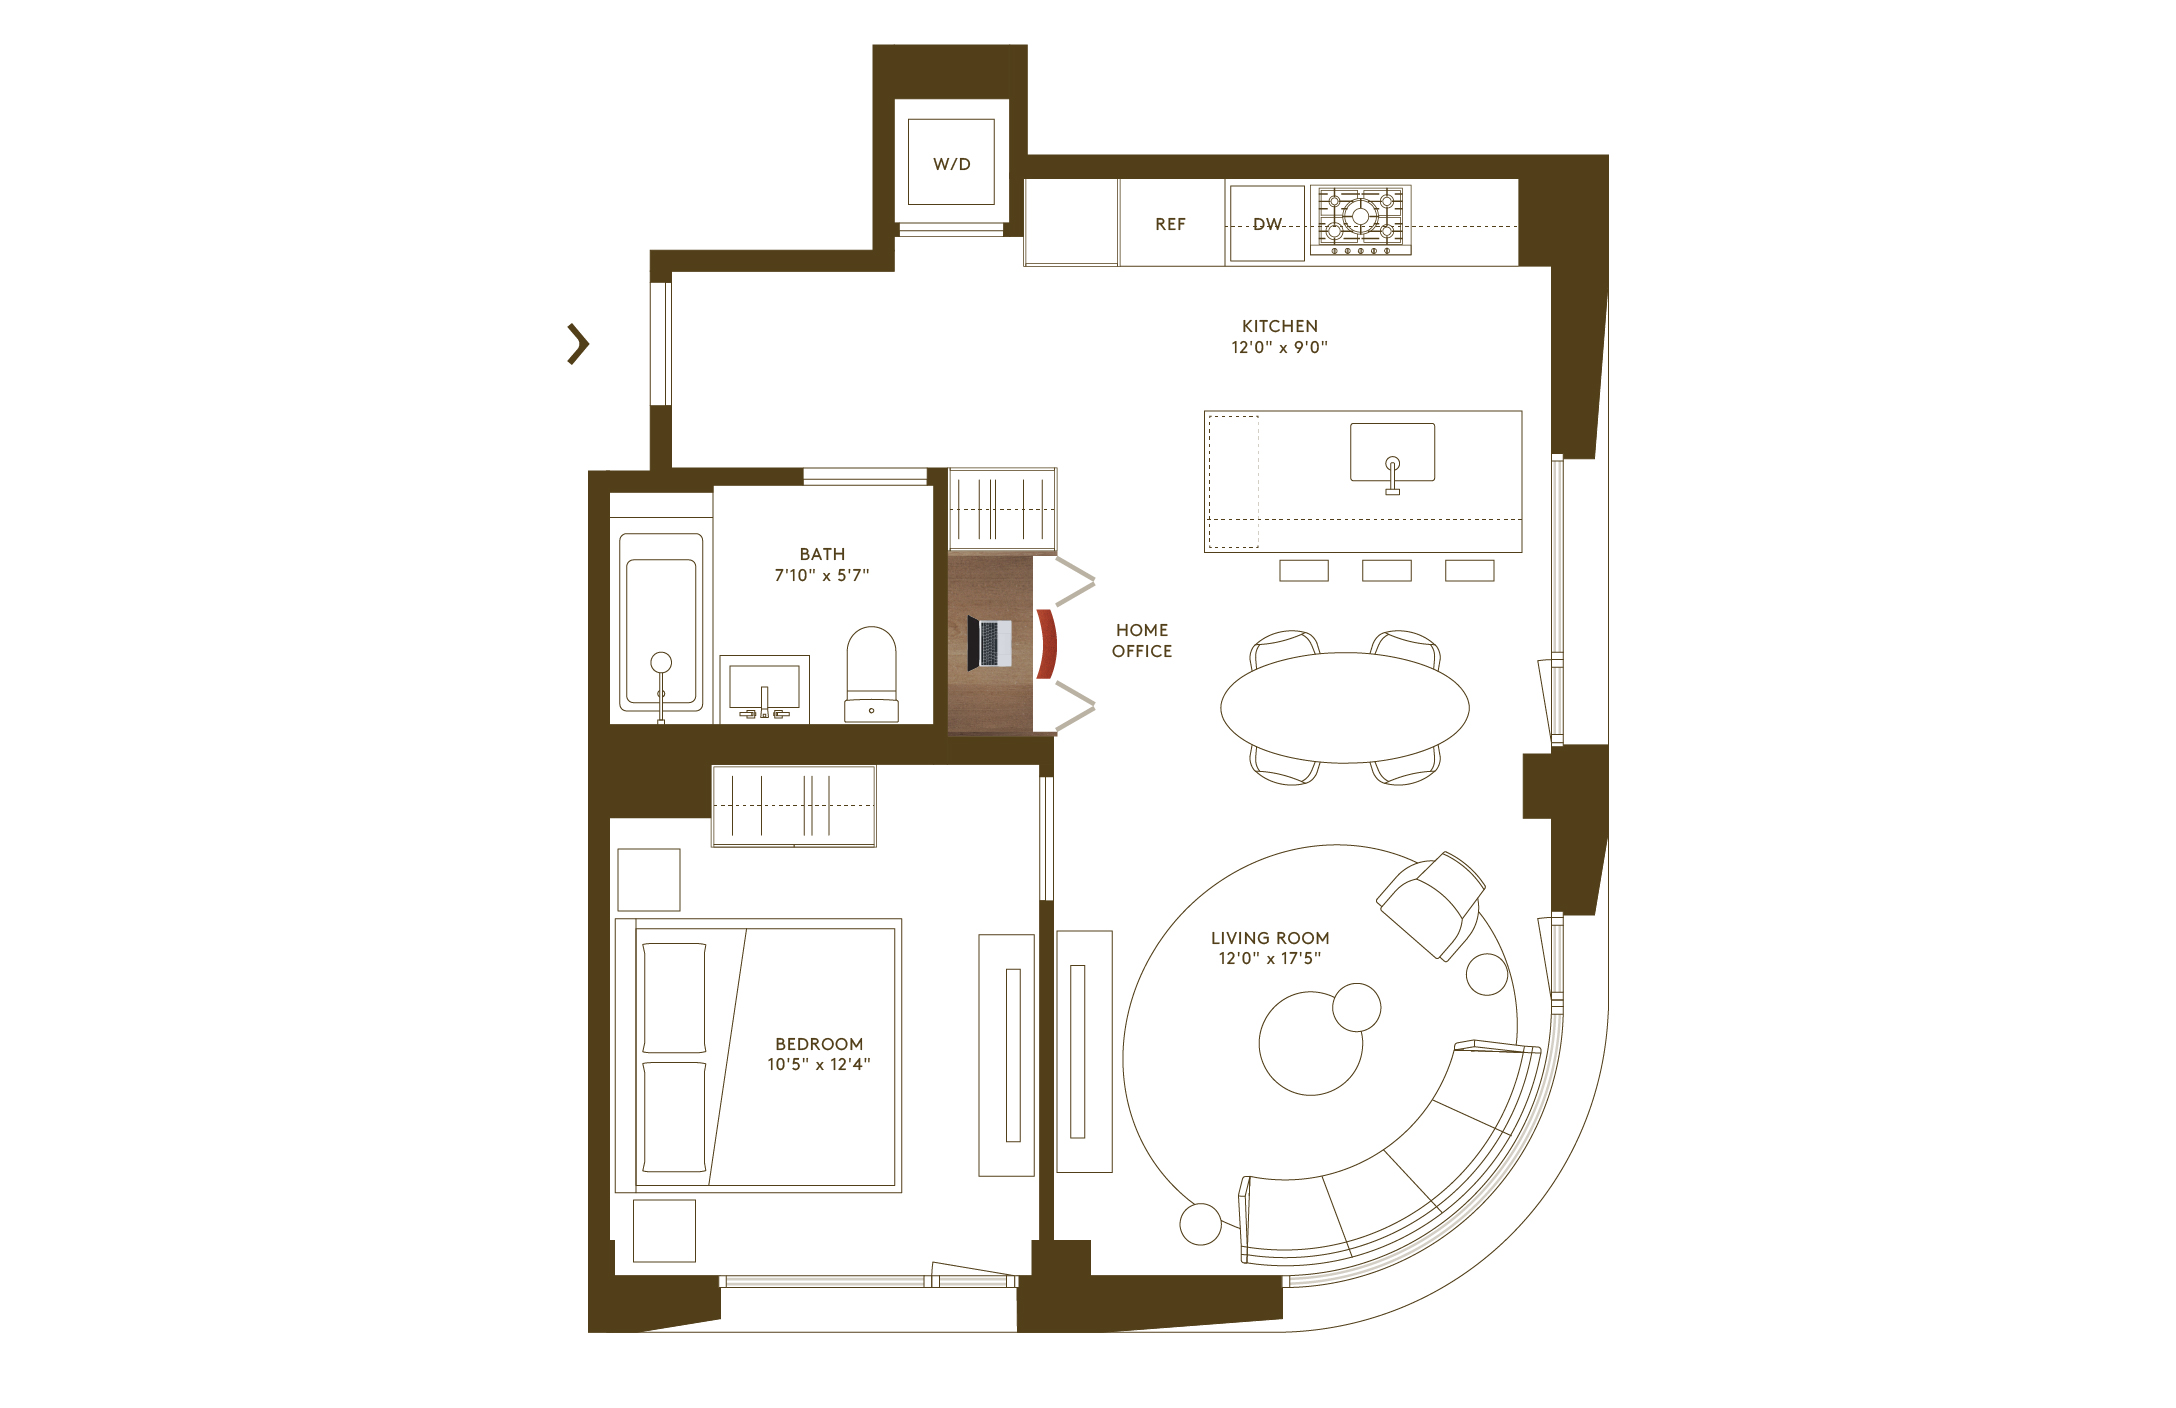 Floorplan of corner 1 BR condominium with home office at Hendrix House NYC condos for sale in Kips Bay.